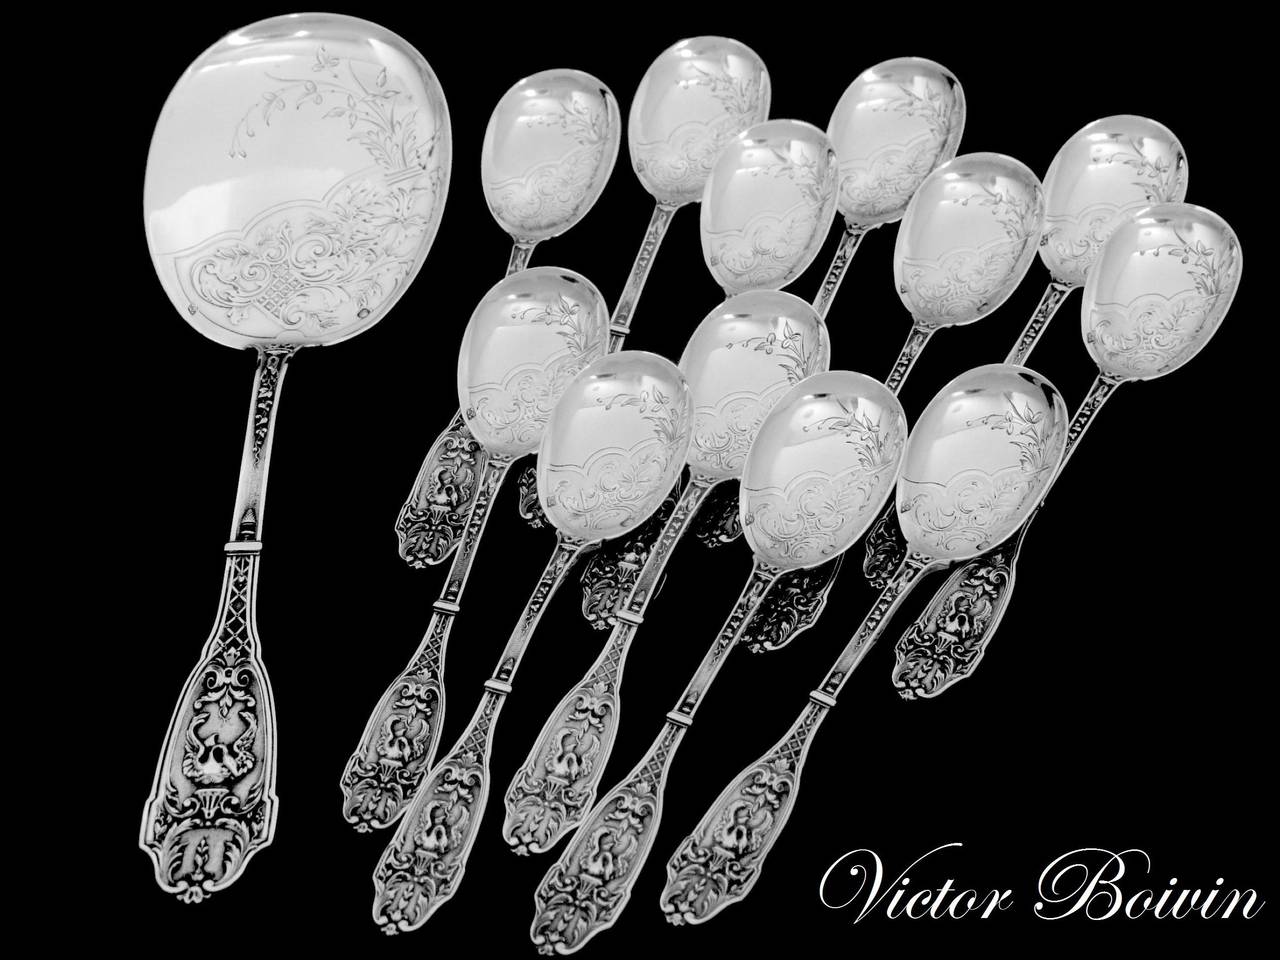 Women's or Men's Boivin Fabulous French All Sterling Silver Ice Cream Set 13 pc Swans